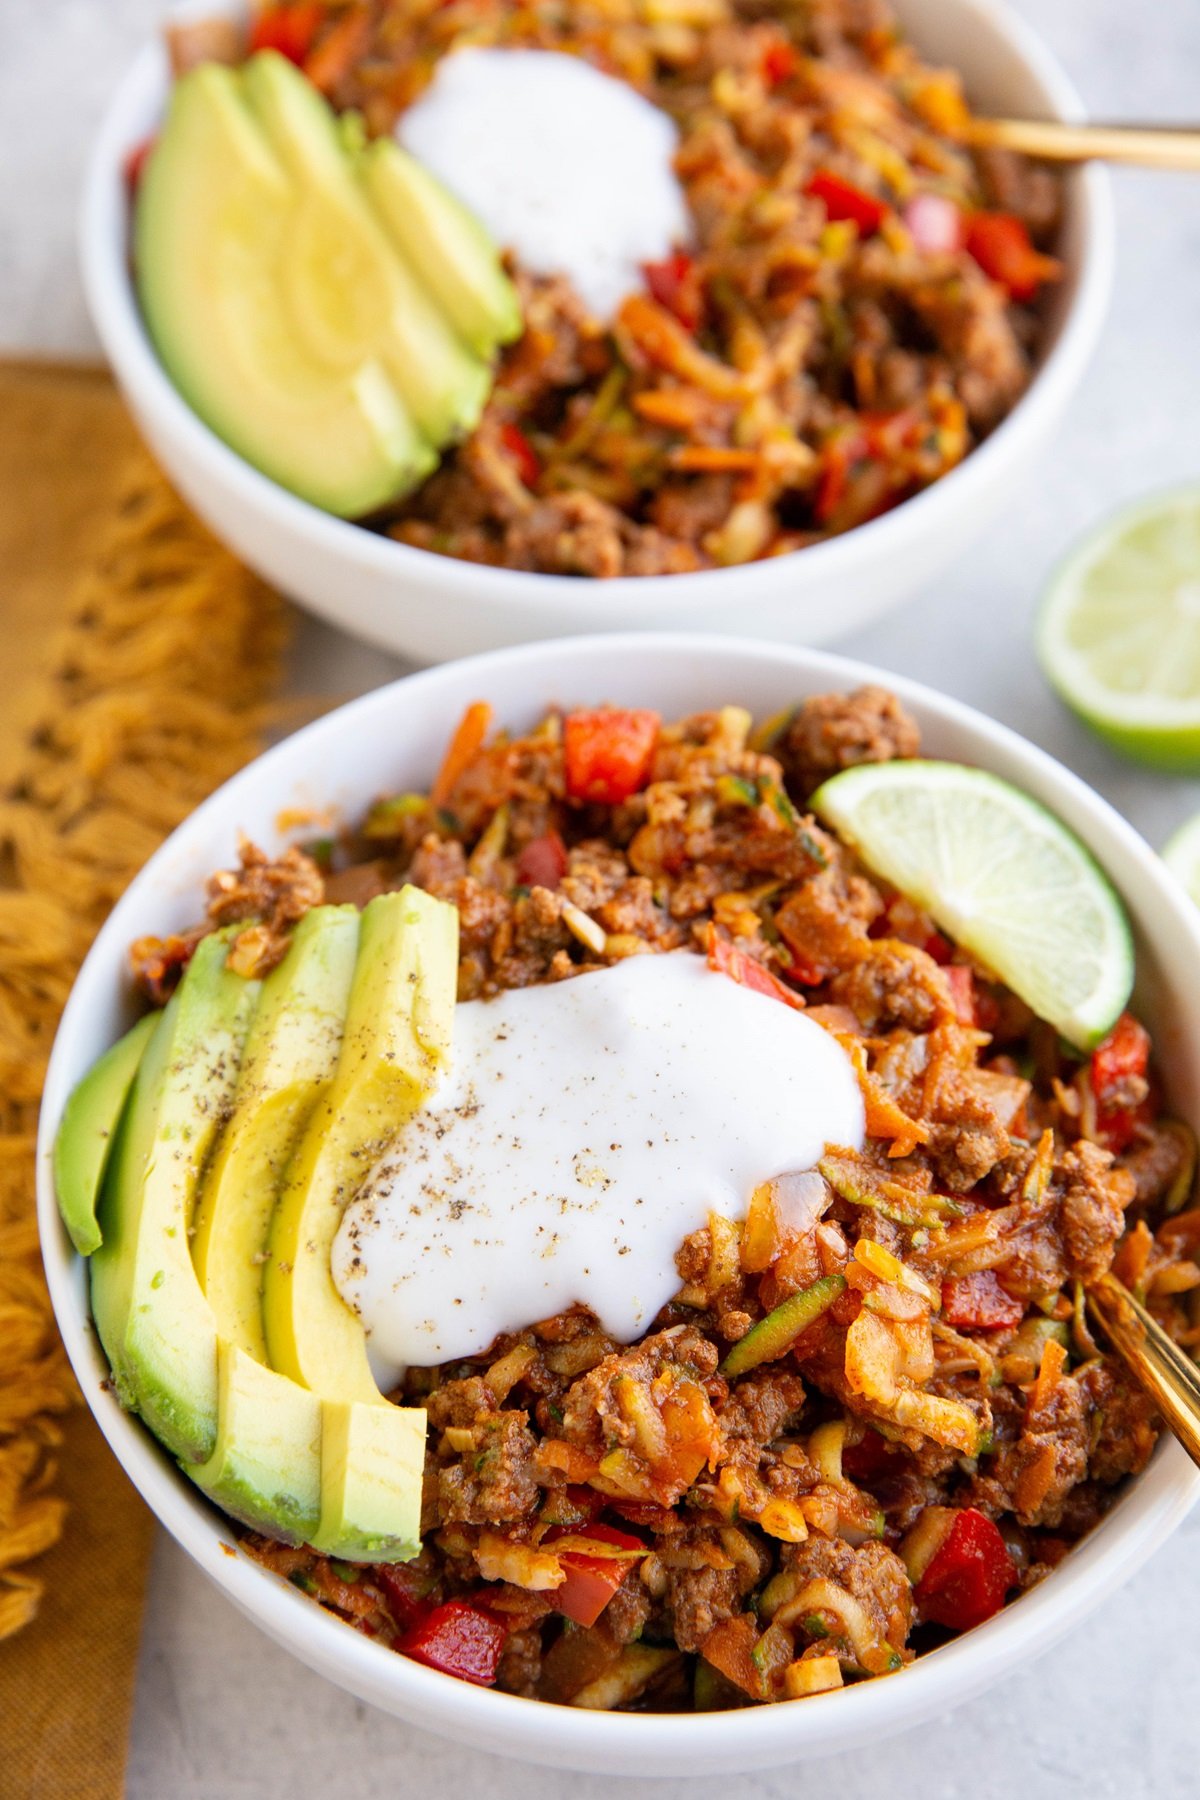 Zucchini and ground beef bowls topped with sour cream and avocado.